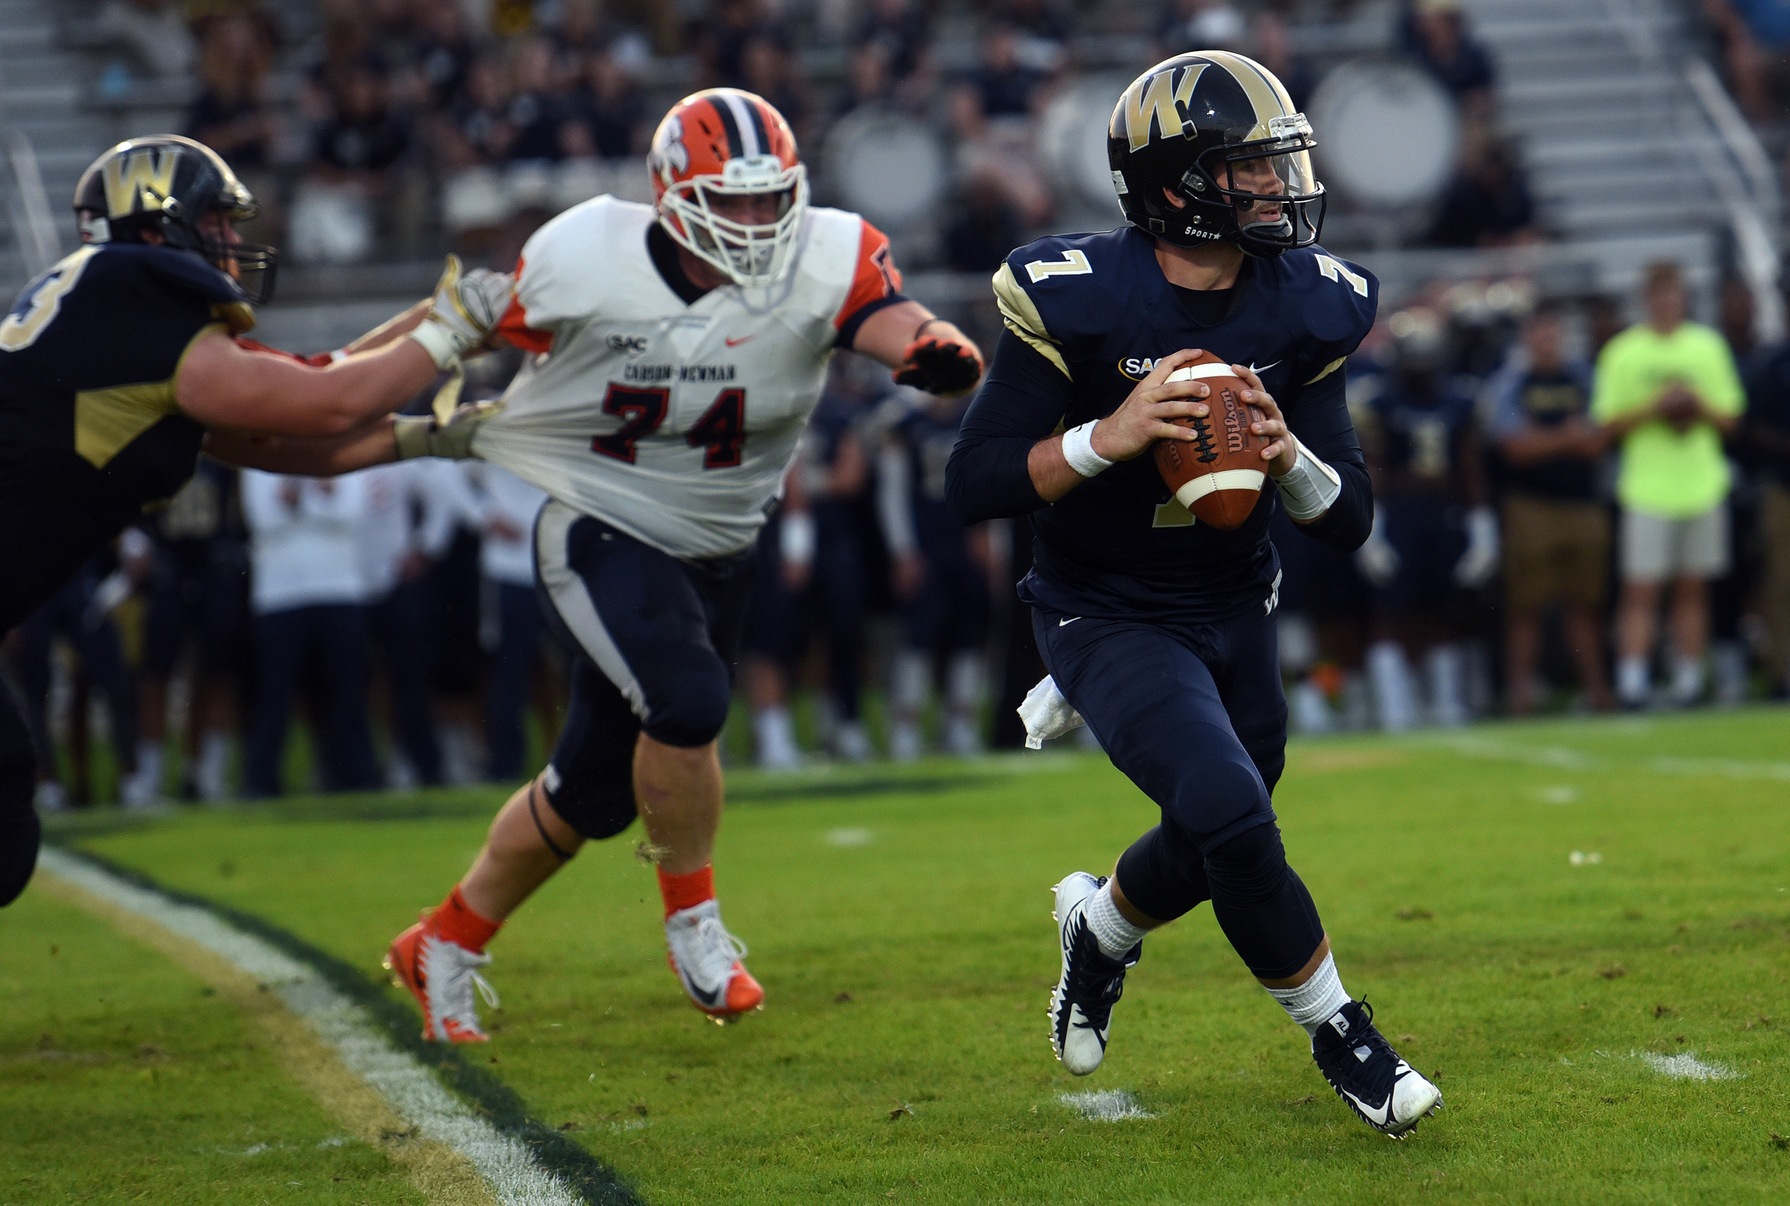 Better Know The Opponent, Week Three: Wingate